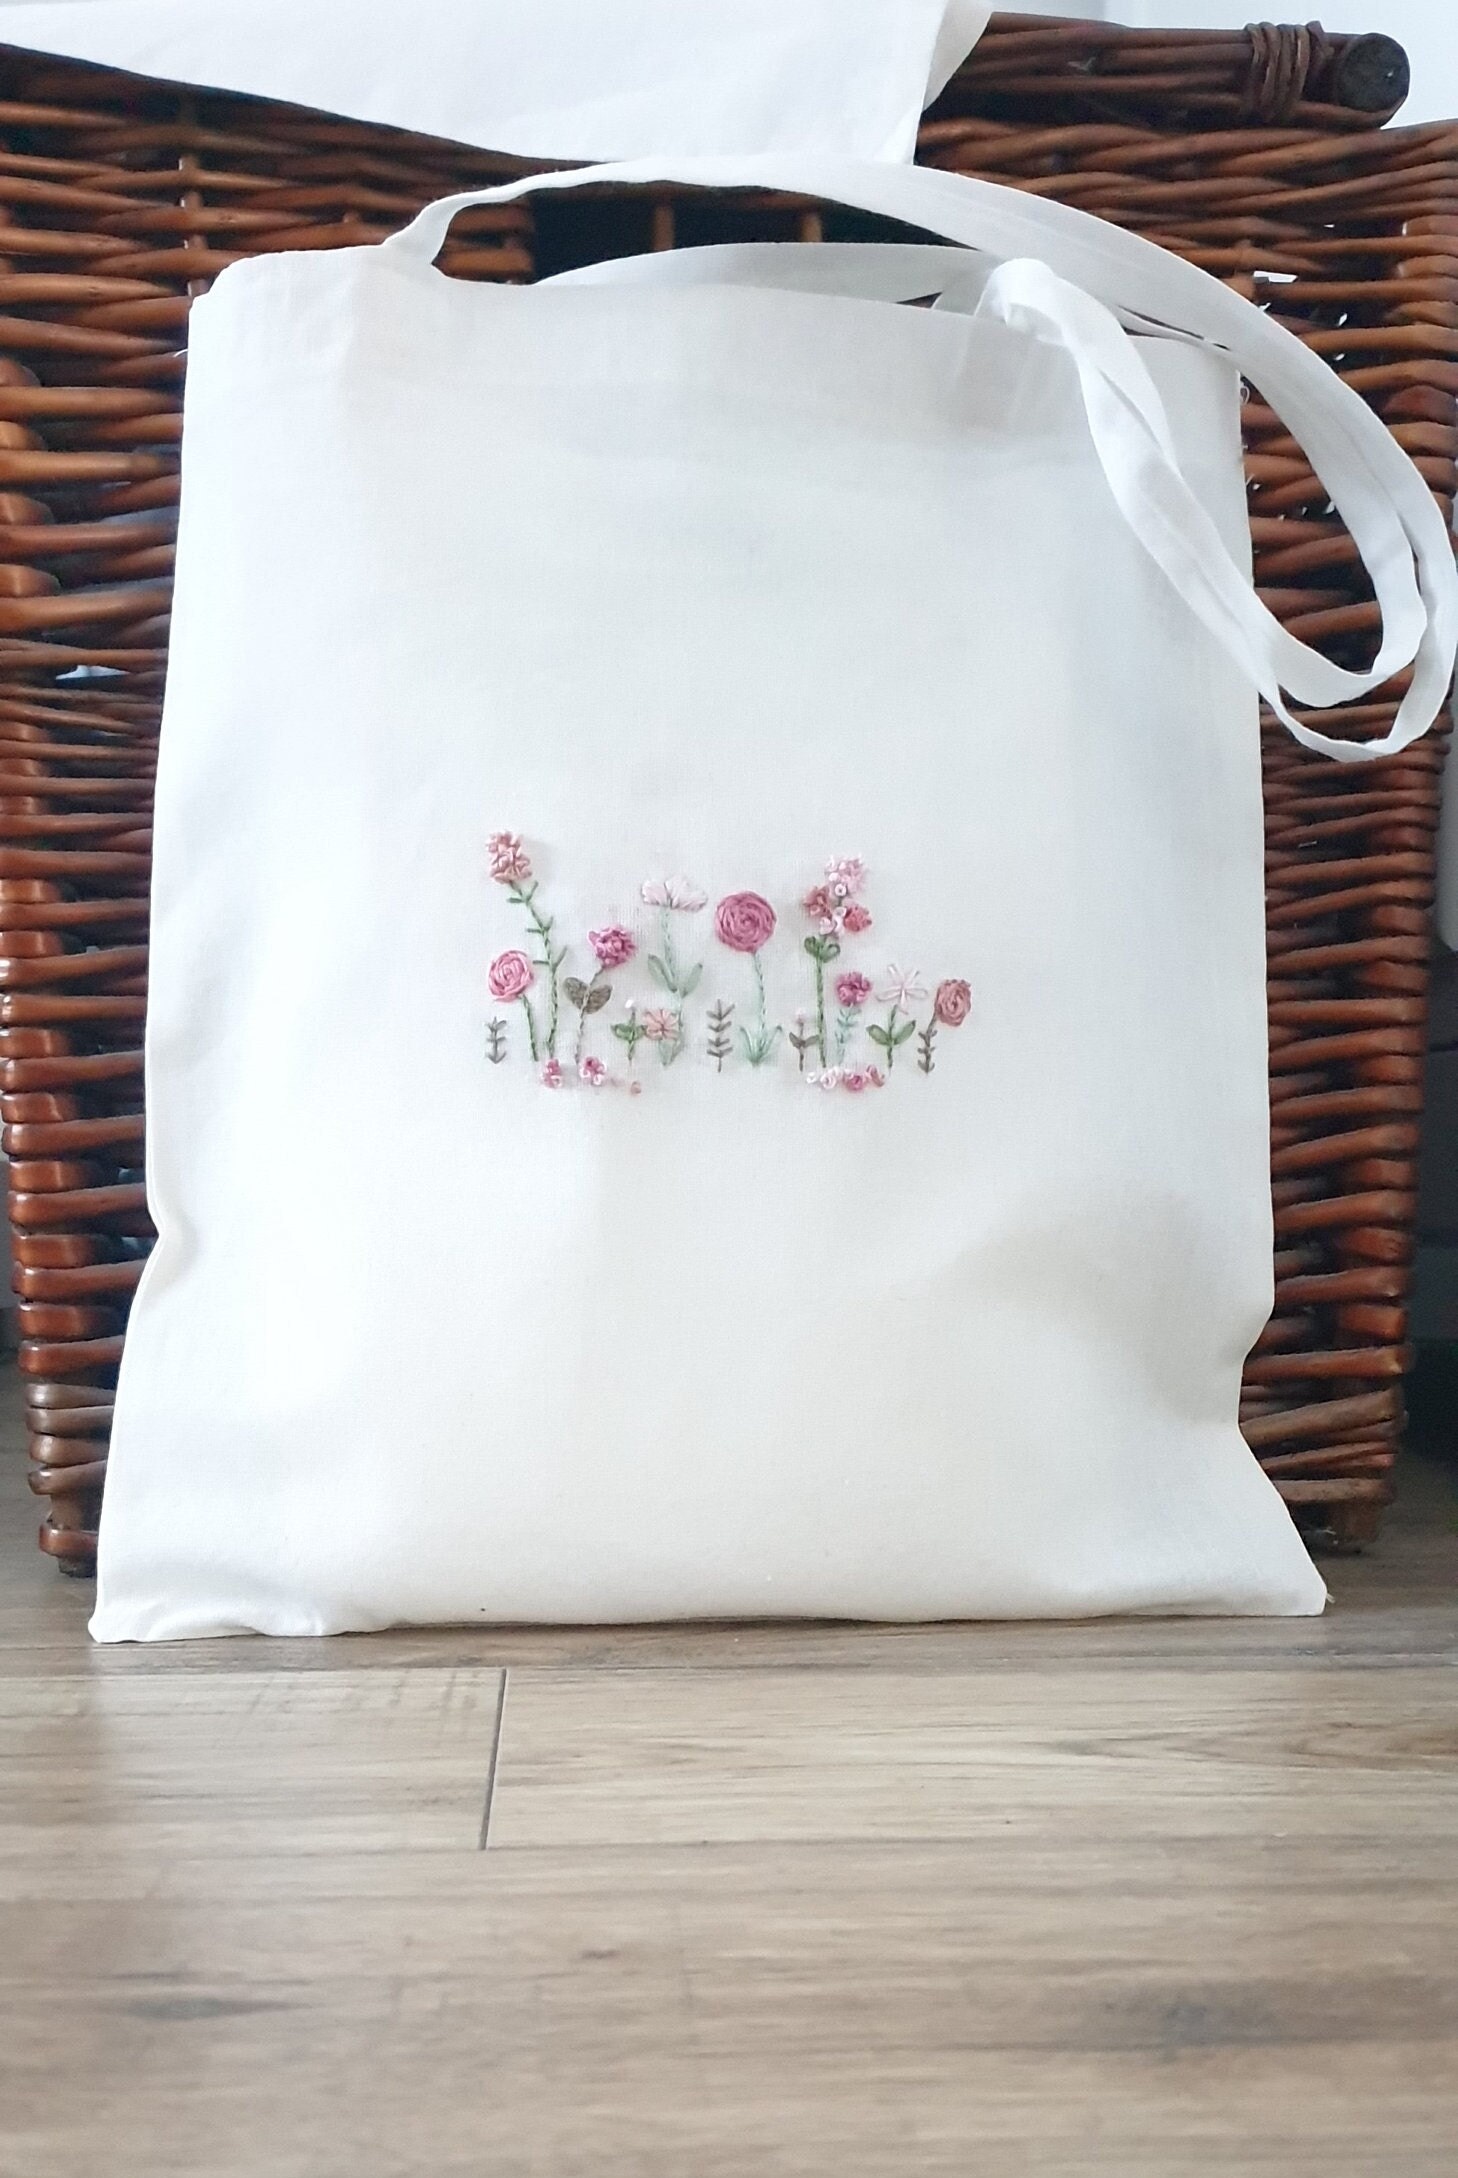 Time to unwind knitting tote bag for crafts shopping storage